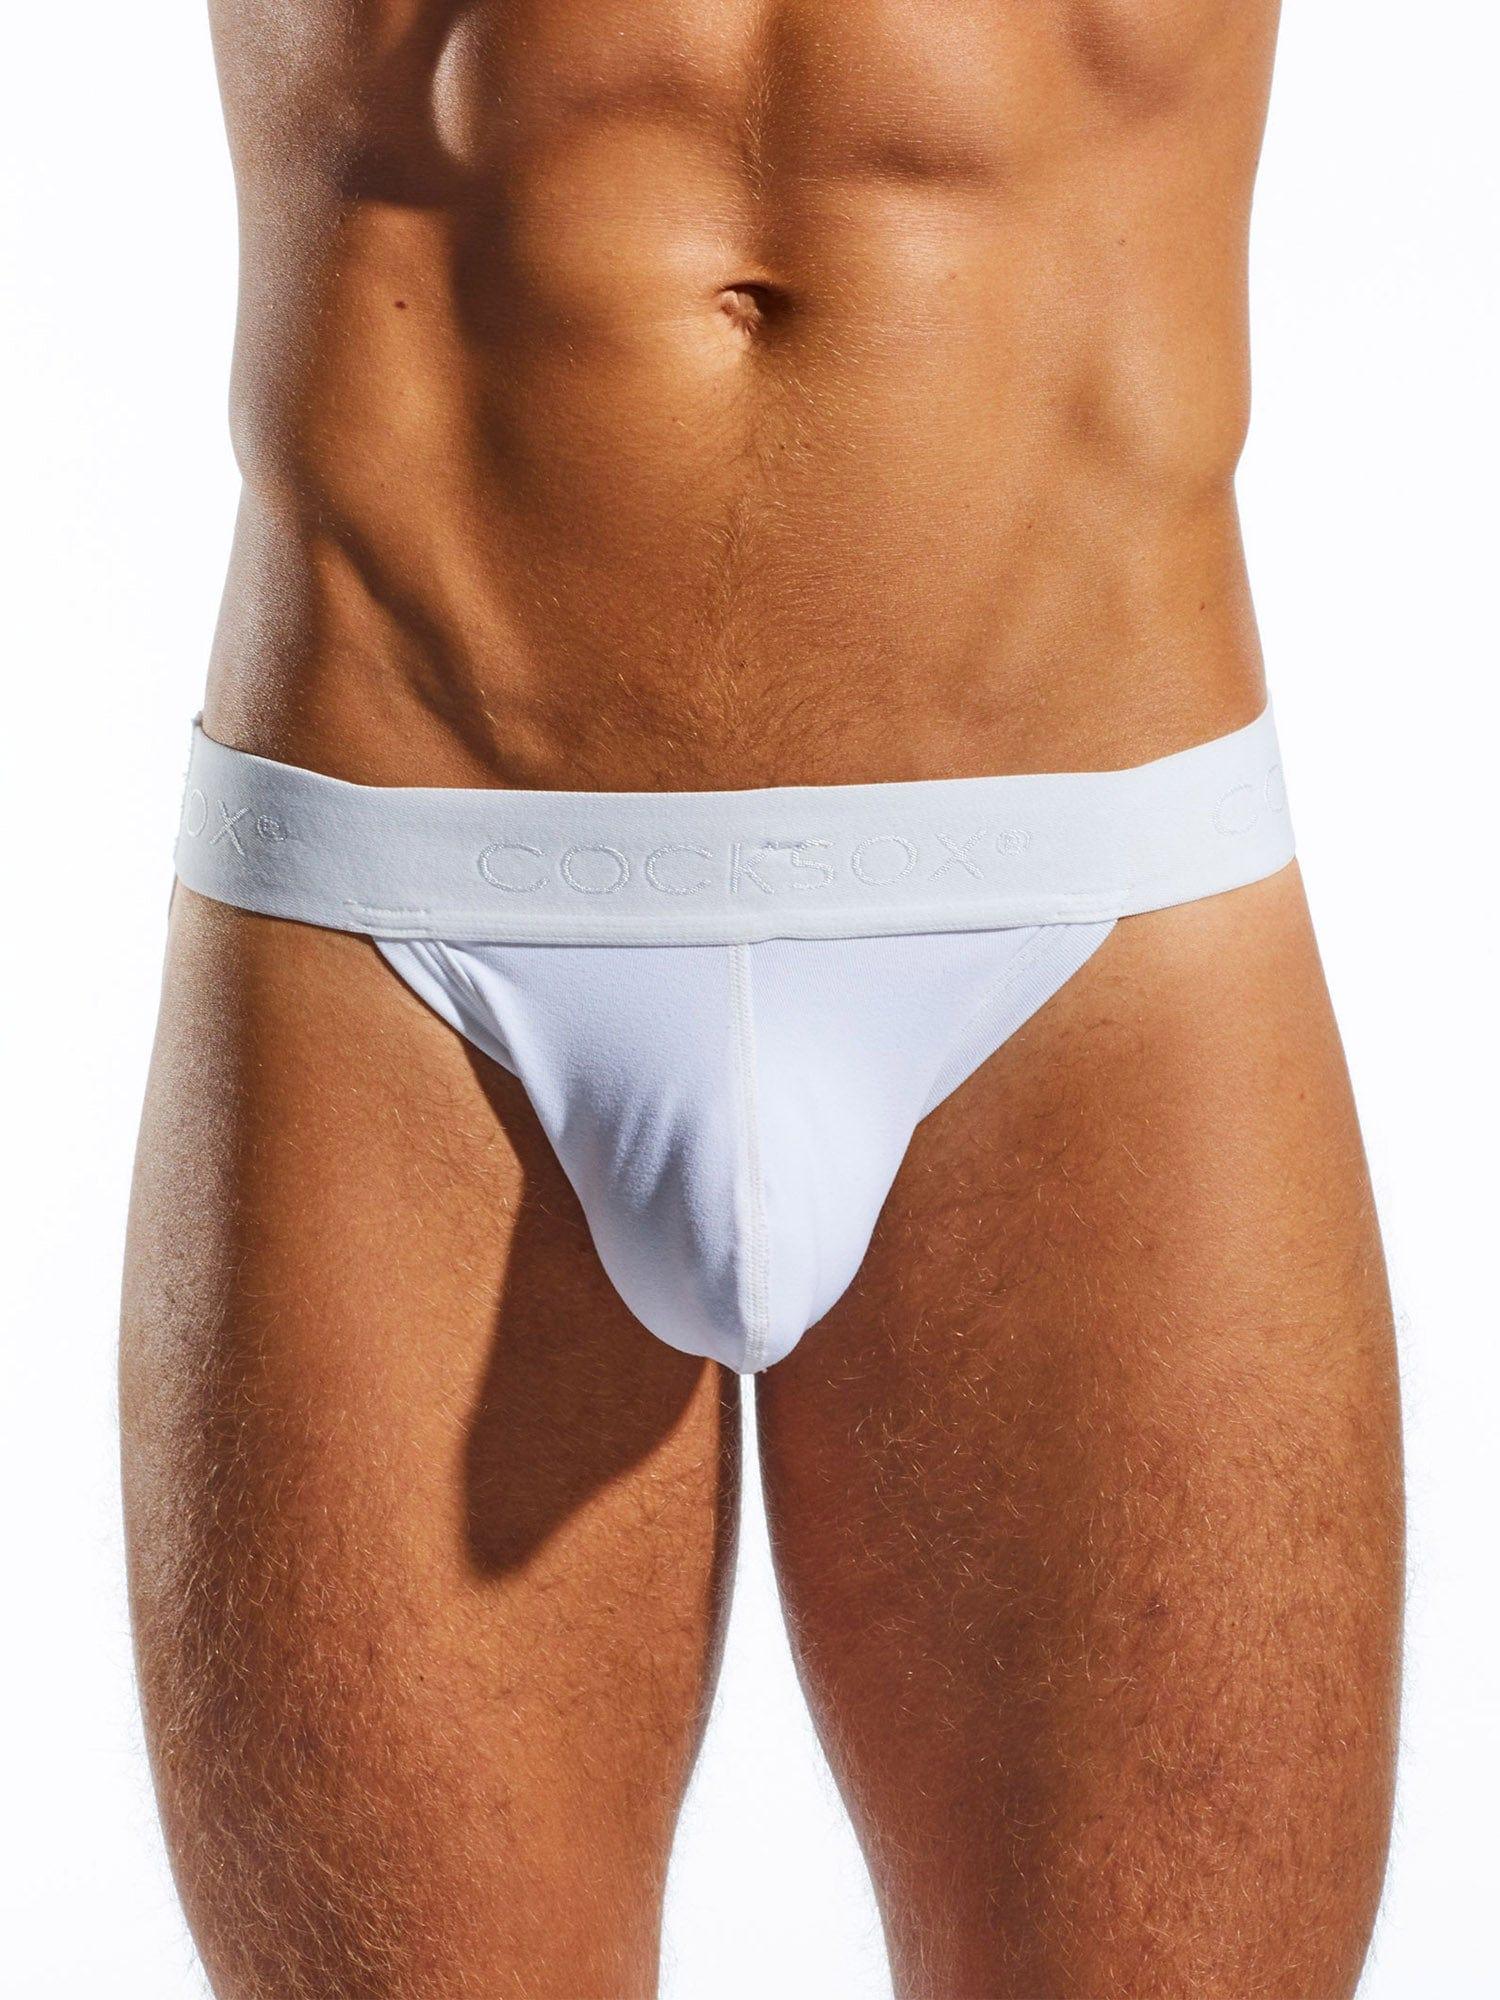 HOM Tanga Briefs in black from the Classic collection